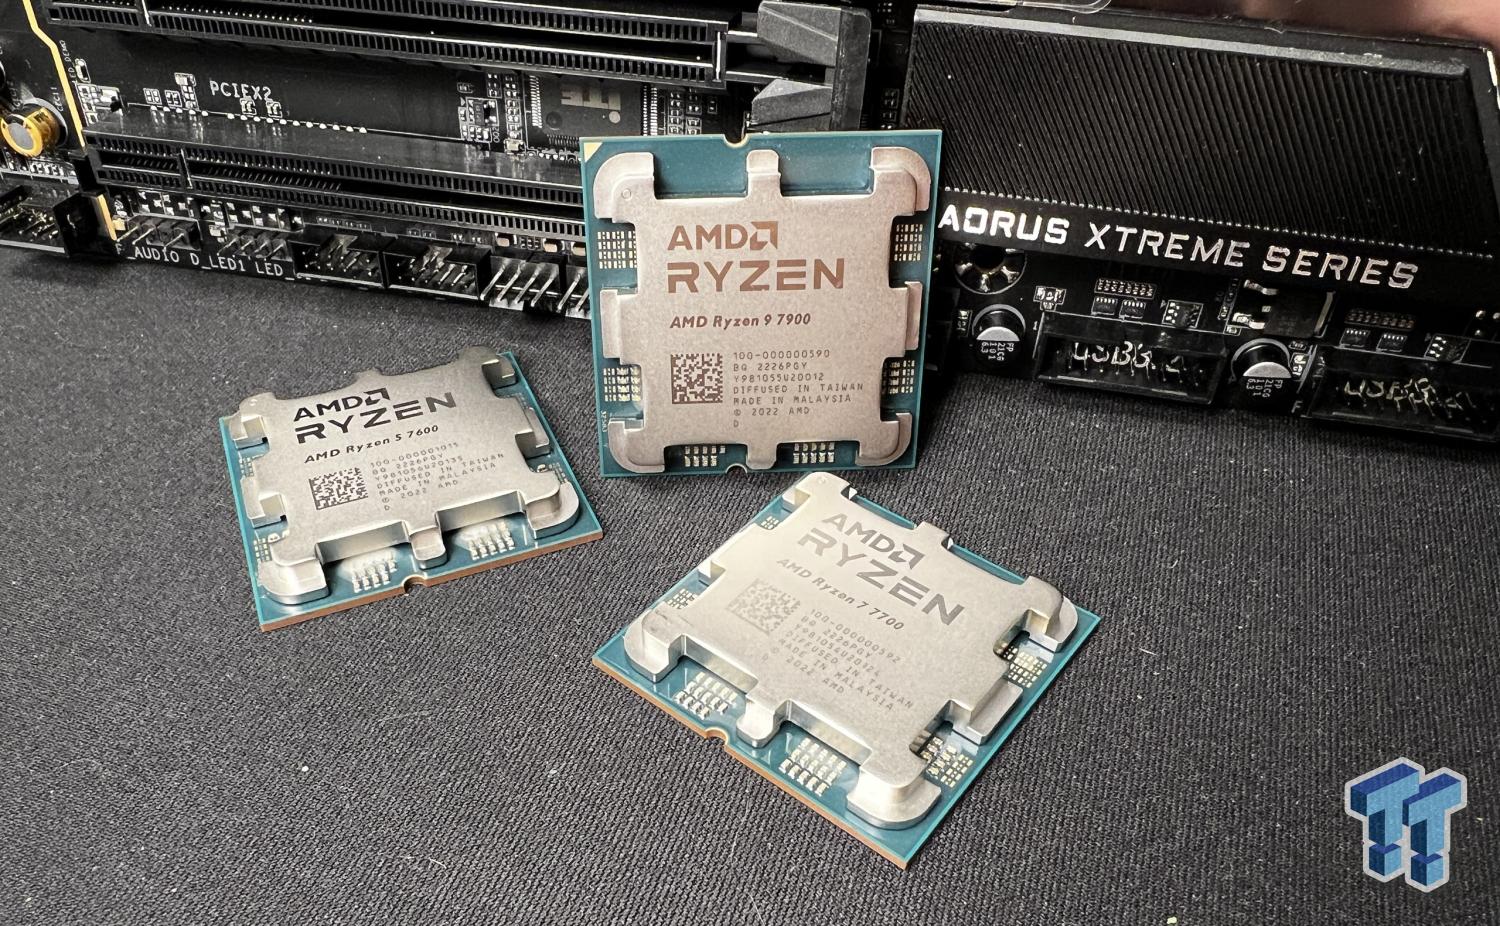 AMD 65W Zen 4 Review: Ryzen 7600, 7700, and 7900 CPUs Tested